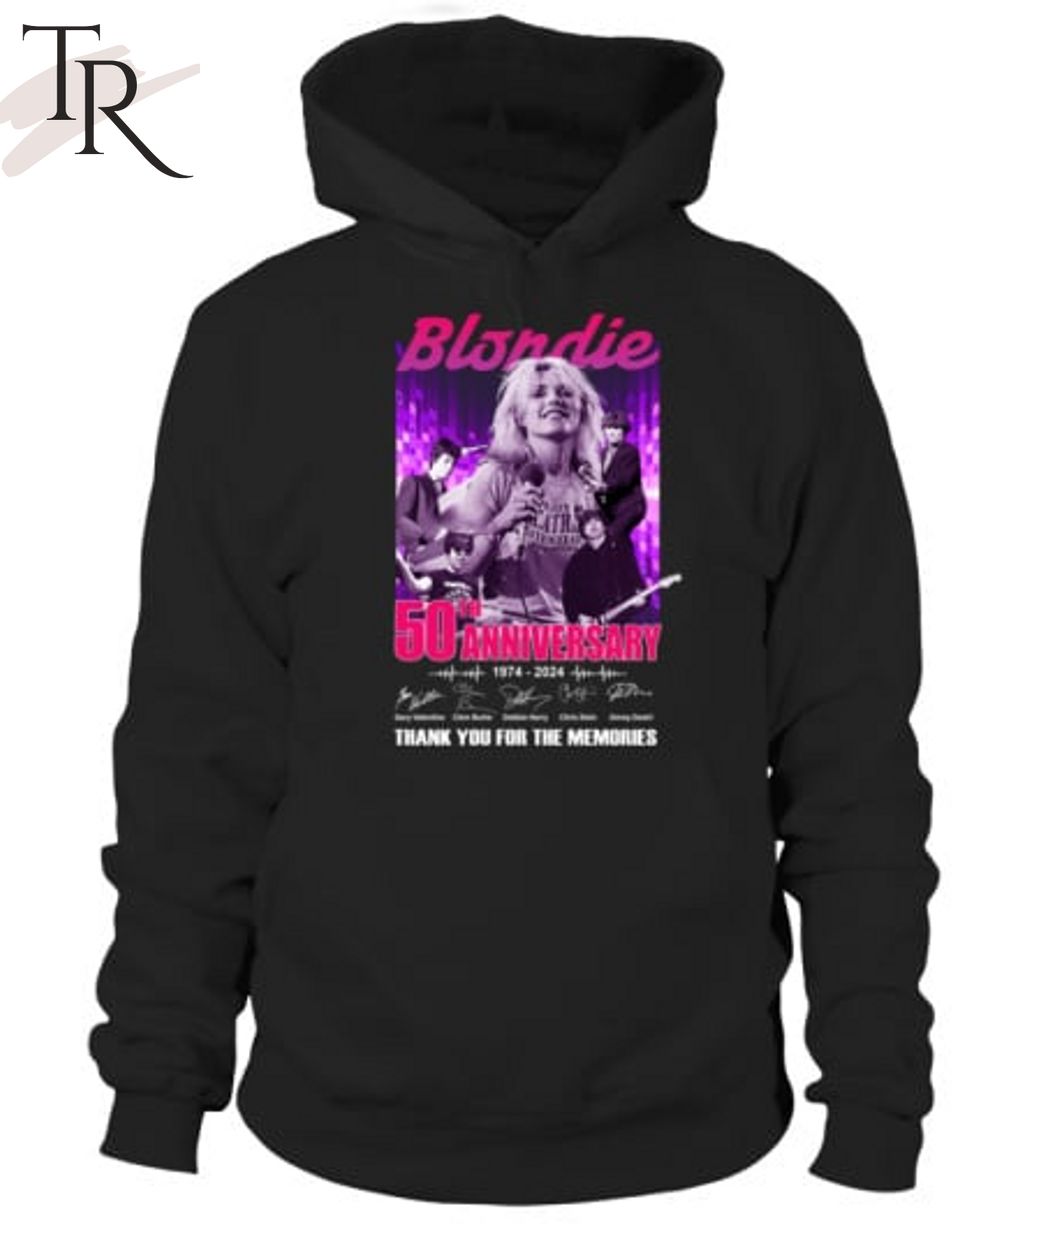 Blondie 50th Anniversary 1974-2024 Thank You For The Memories T-Shirt